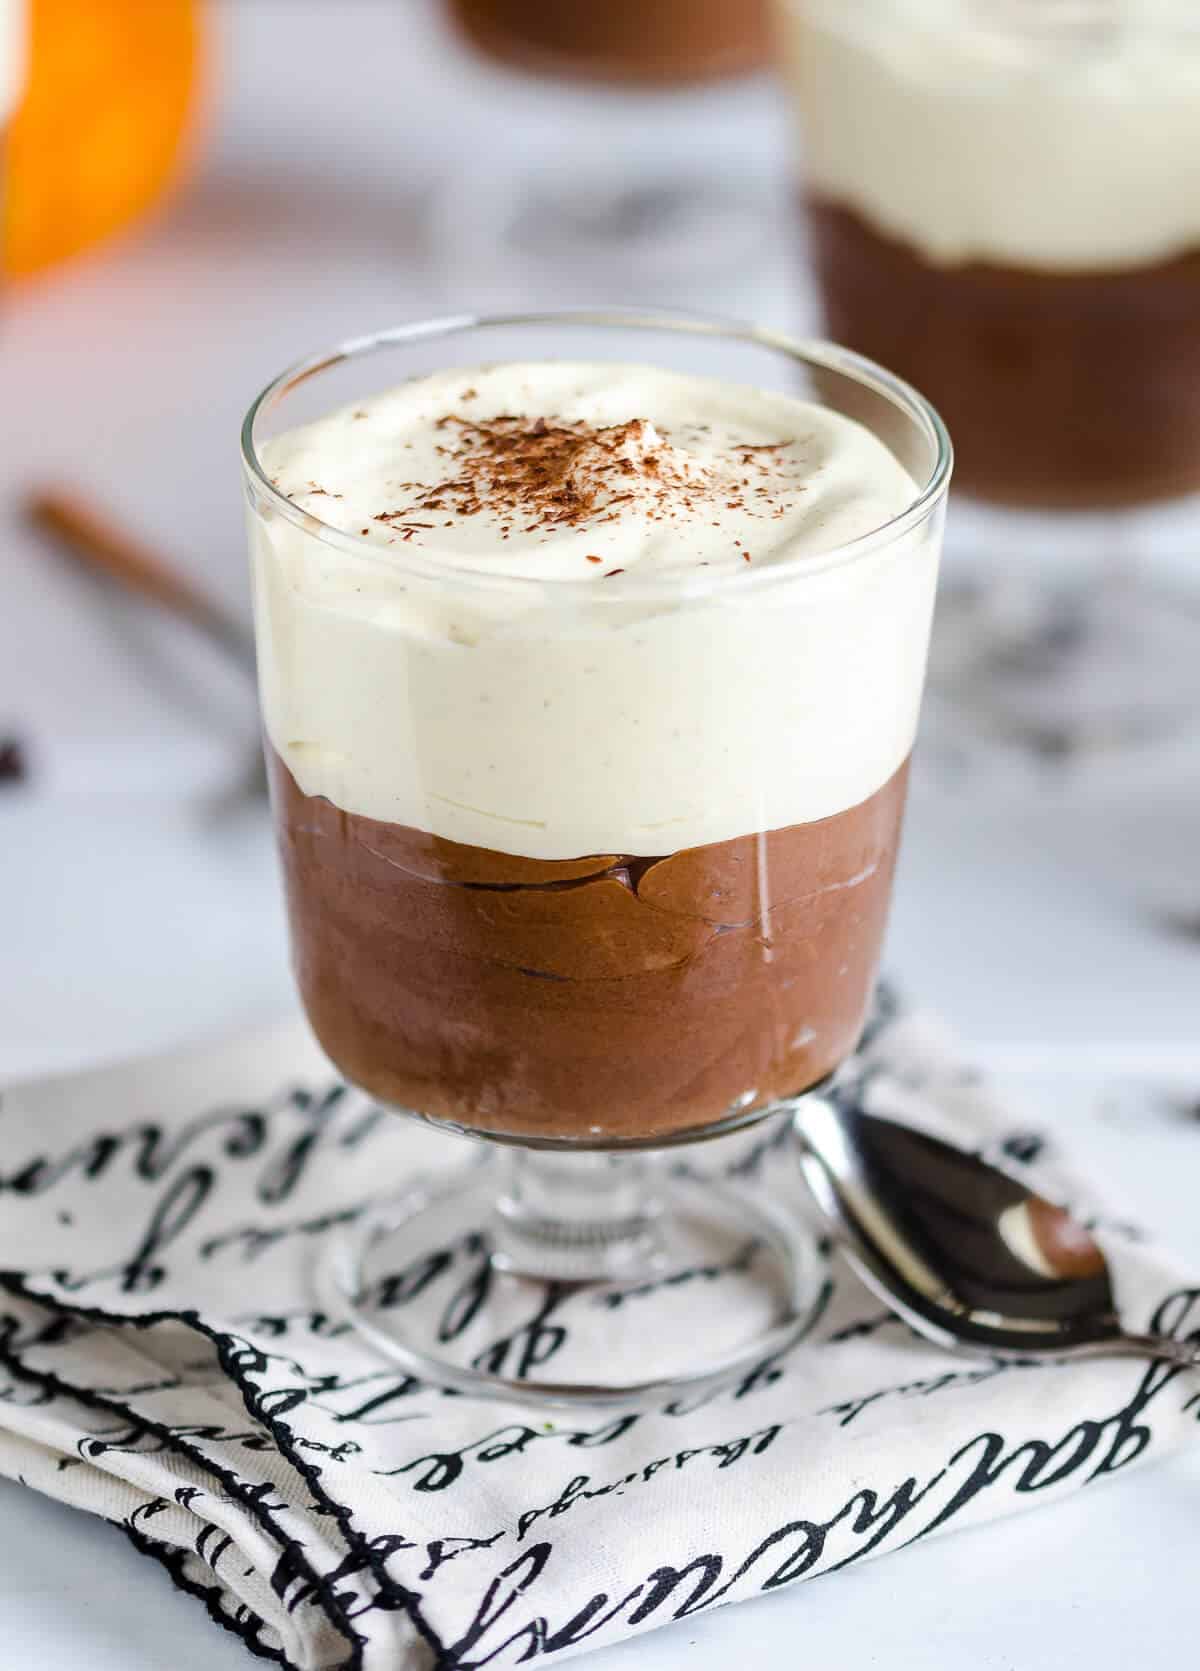 Chocolate mousse with pumpkin whipped cream